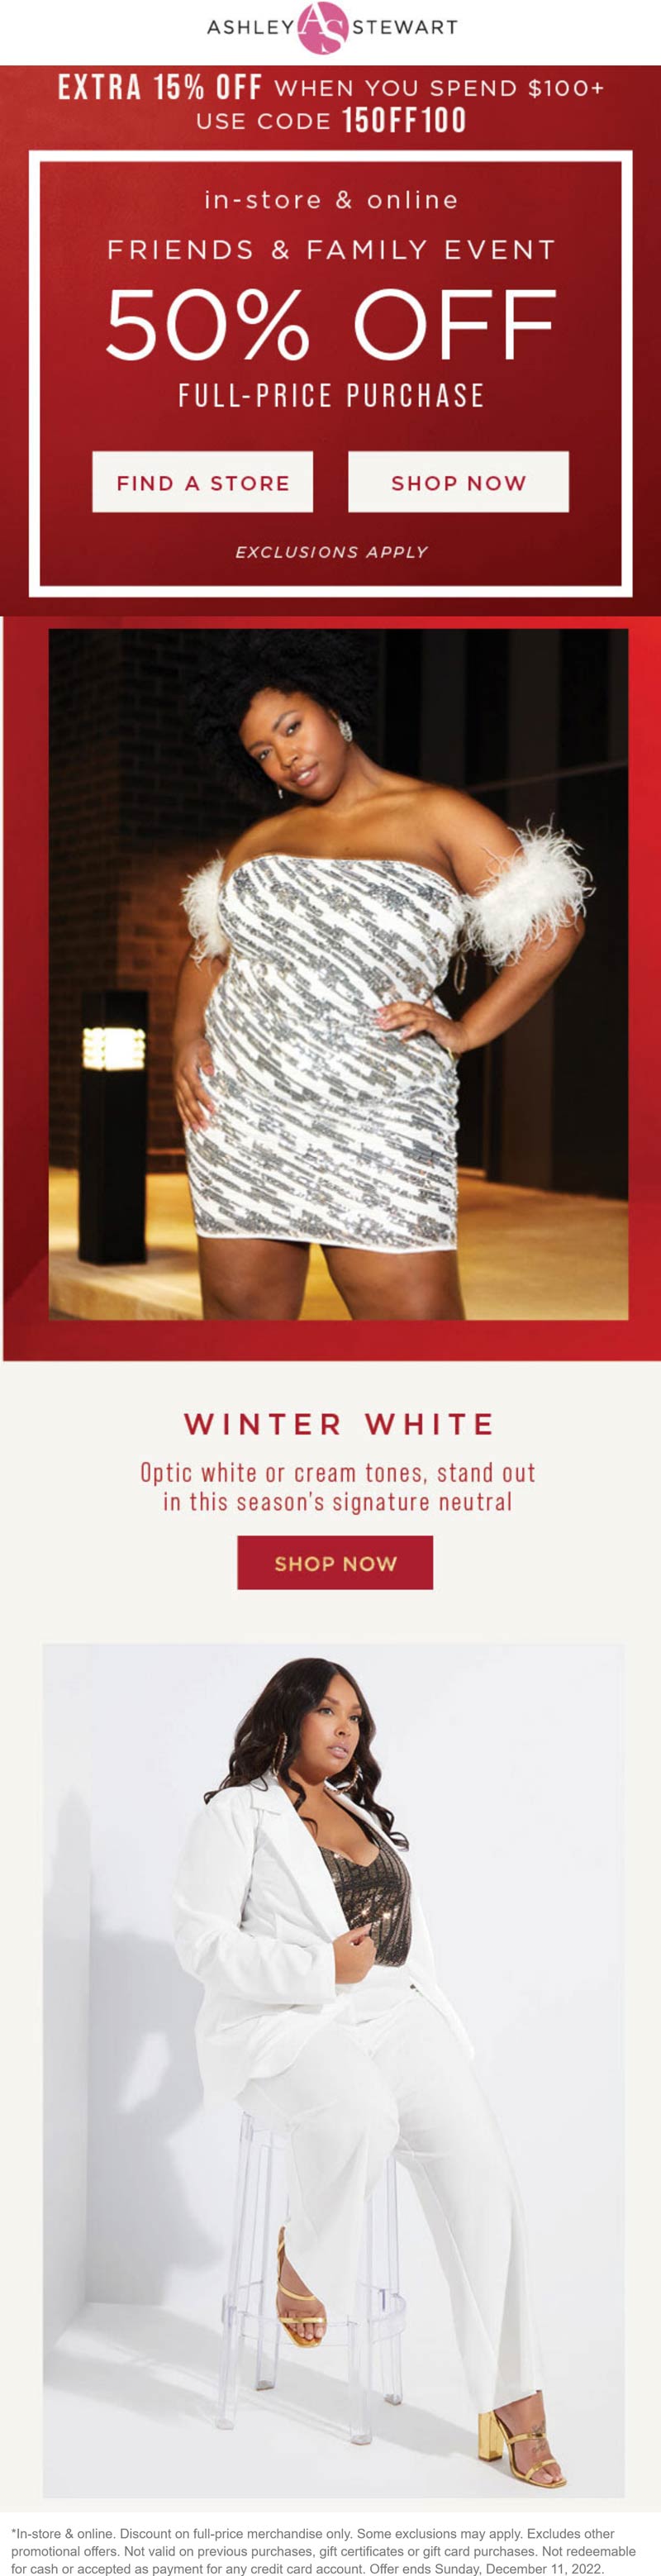 Ashley Stewart coupons & promo code for [January 2023]